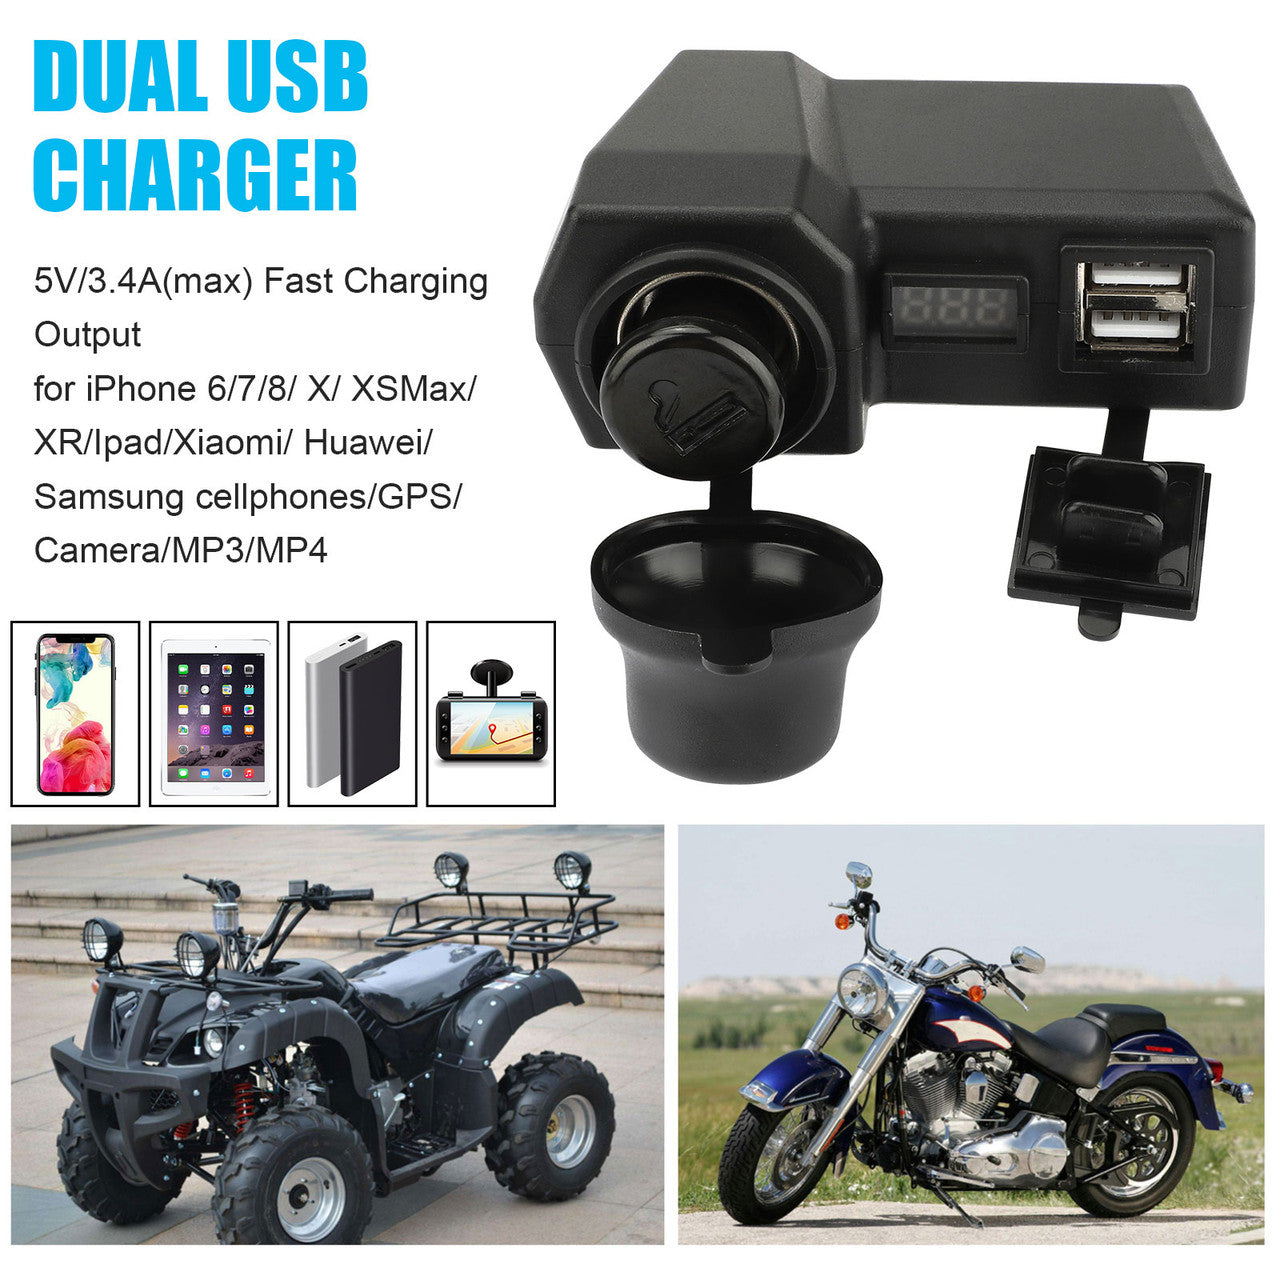 Motorcycle Dual USB Charger Socket w/ Cigarette Lighter Voltmeter Display, 5V/3.4A Motorcycle SAE to USB Adapter Charger for Phone/Tablets, Waterproof, for 12-24V Motorcycle Electric Car